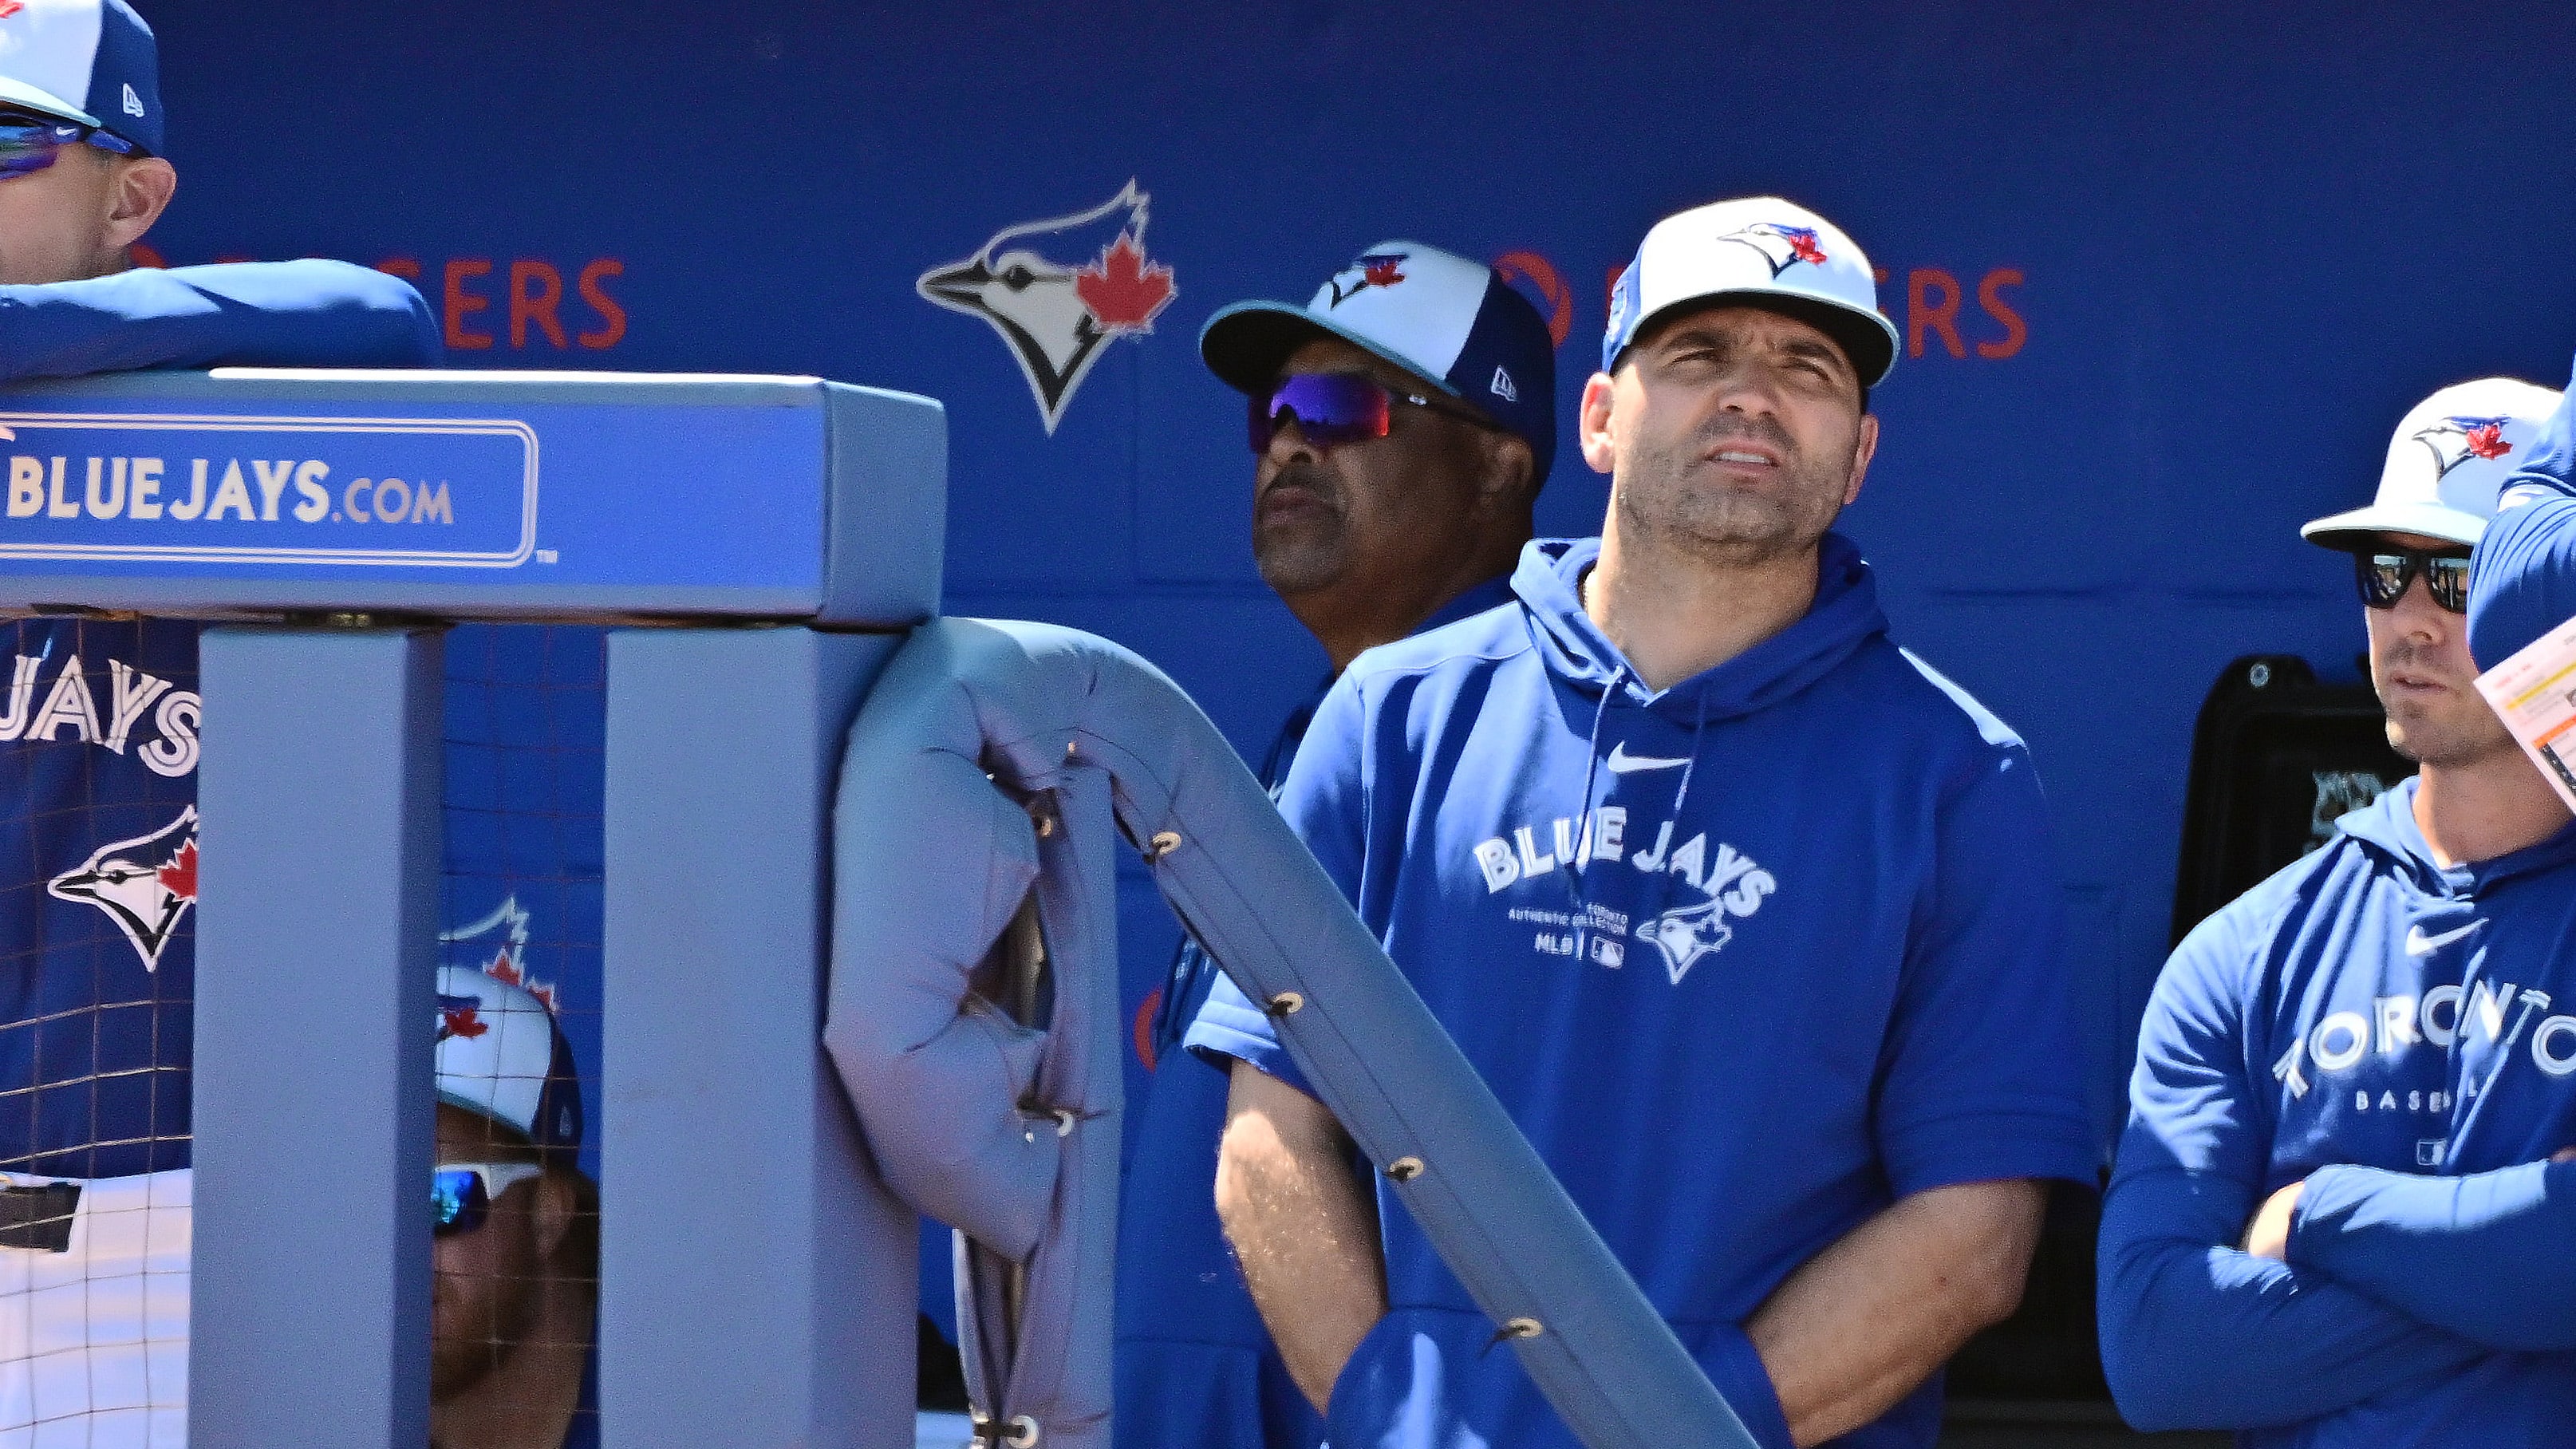 Toronto Blue Jays first baseman Joey Votto in the dugout during a Spring Training game against the Baltimore Orioles.